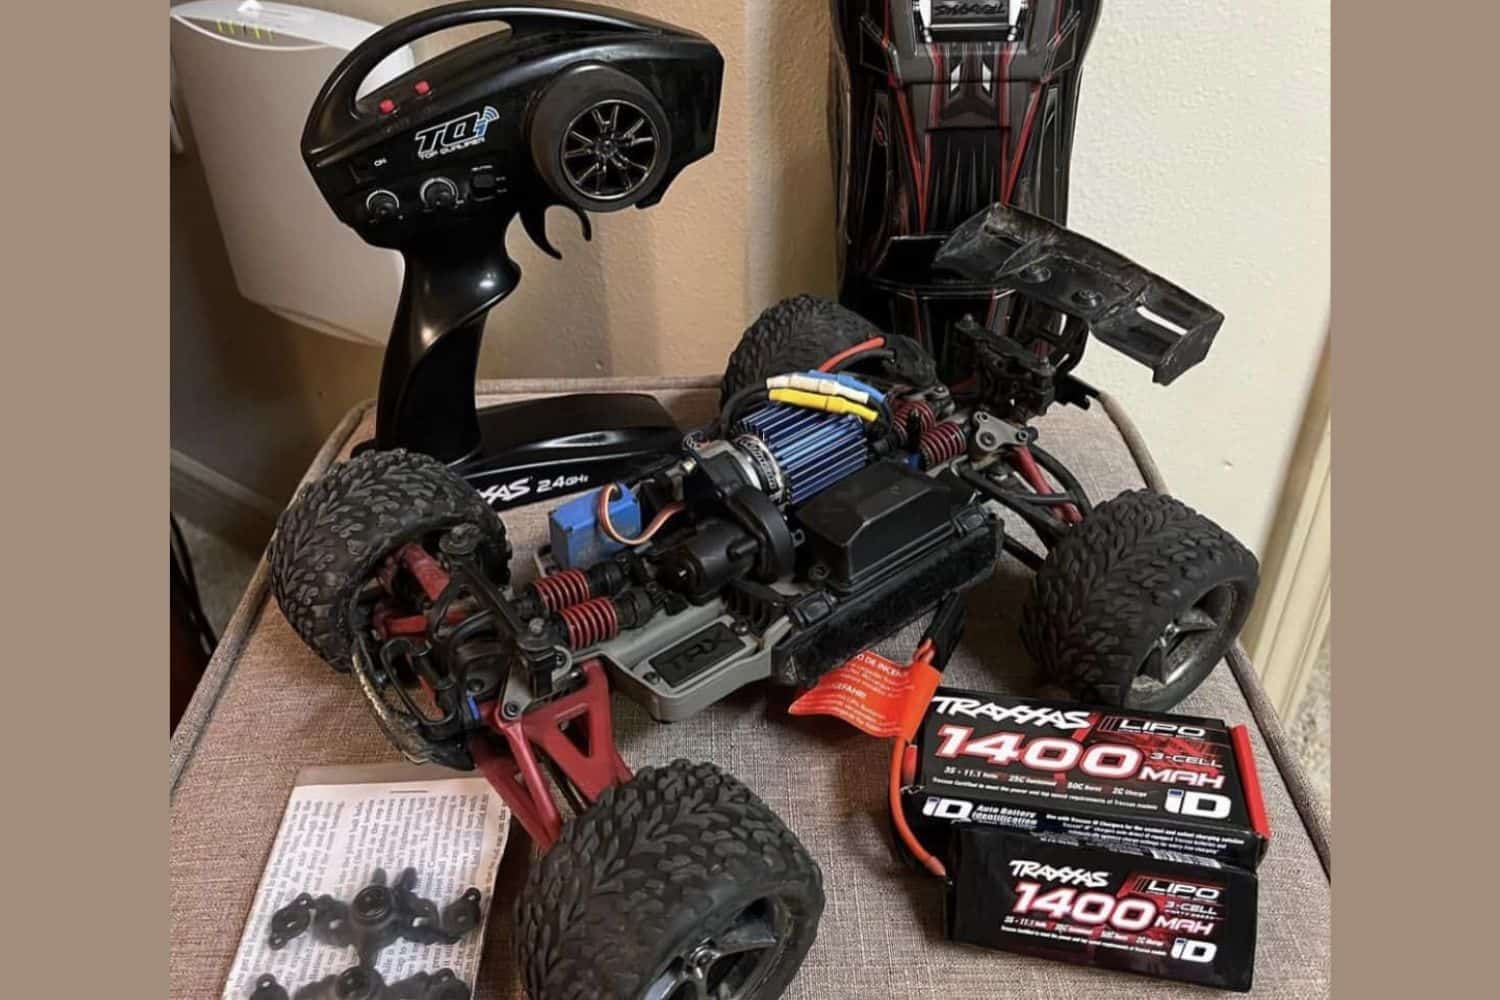 Essential Components of RC Cars: Power, Control, and Performance